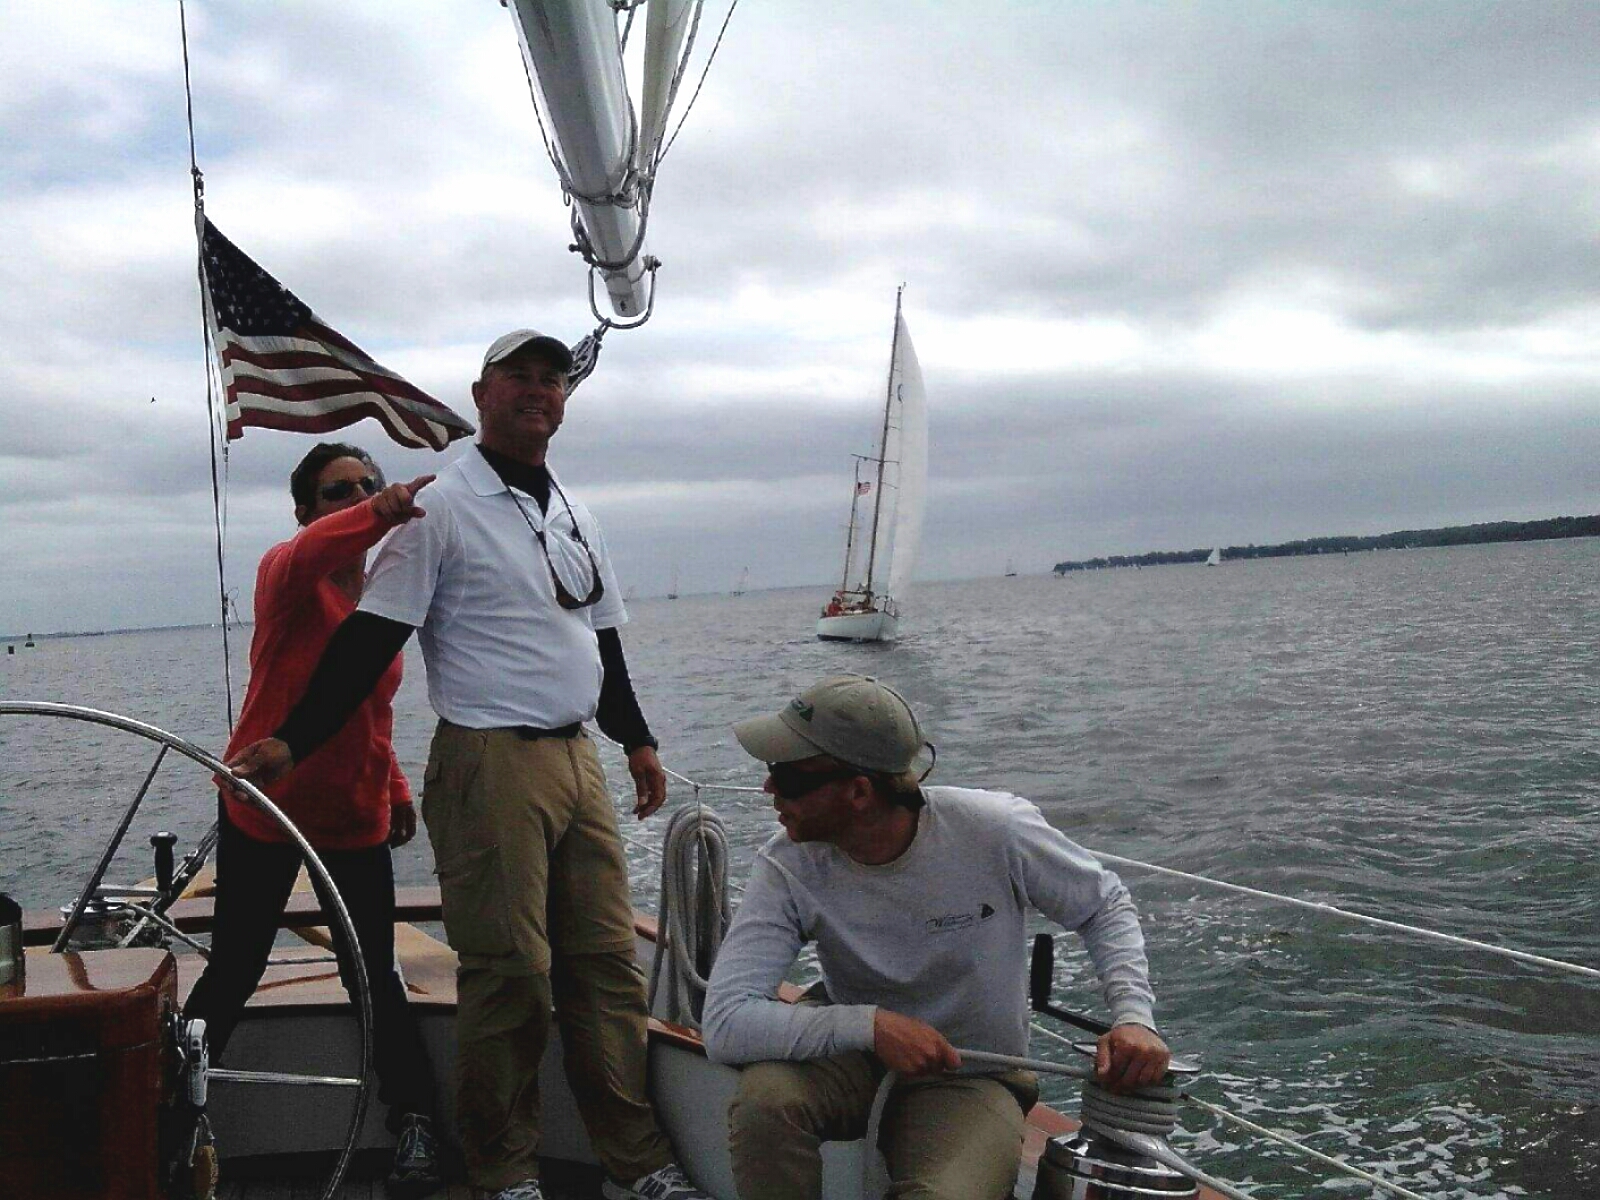 Captains on schooner working together with crew to win a race